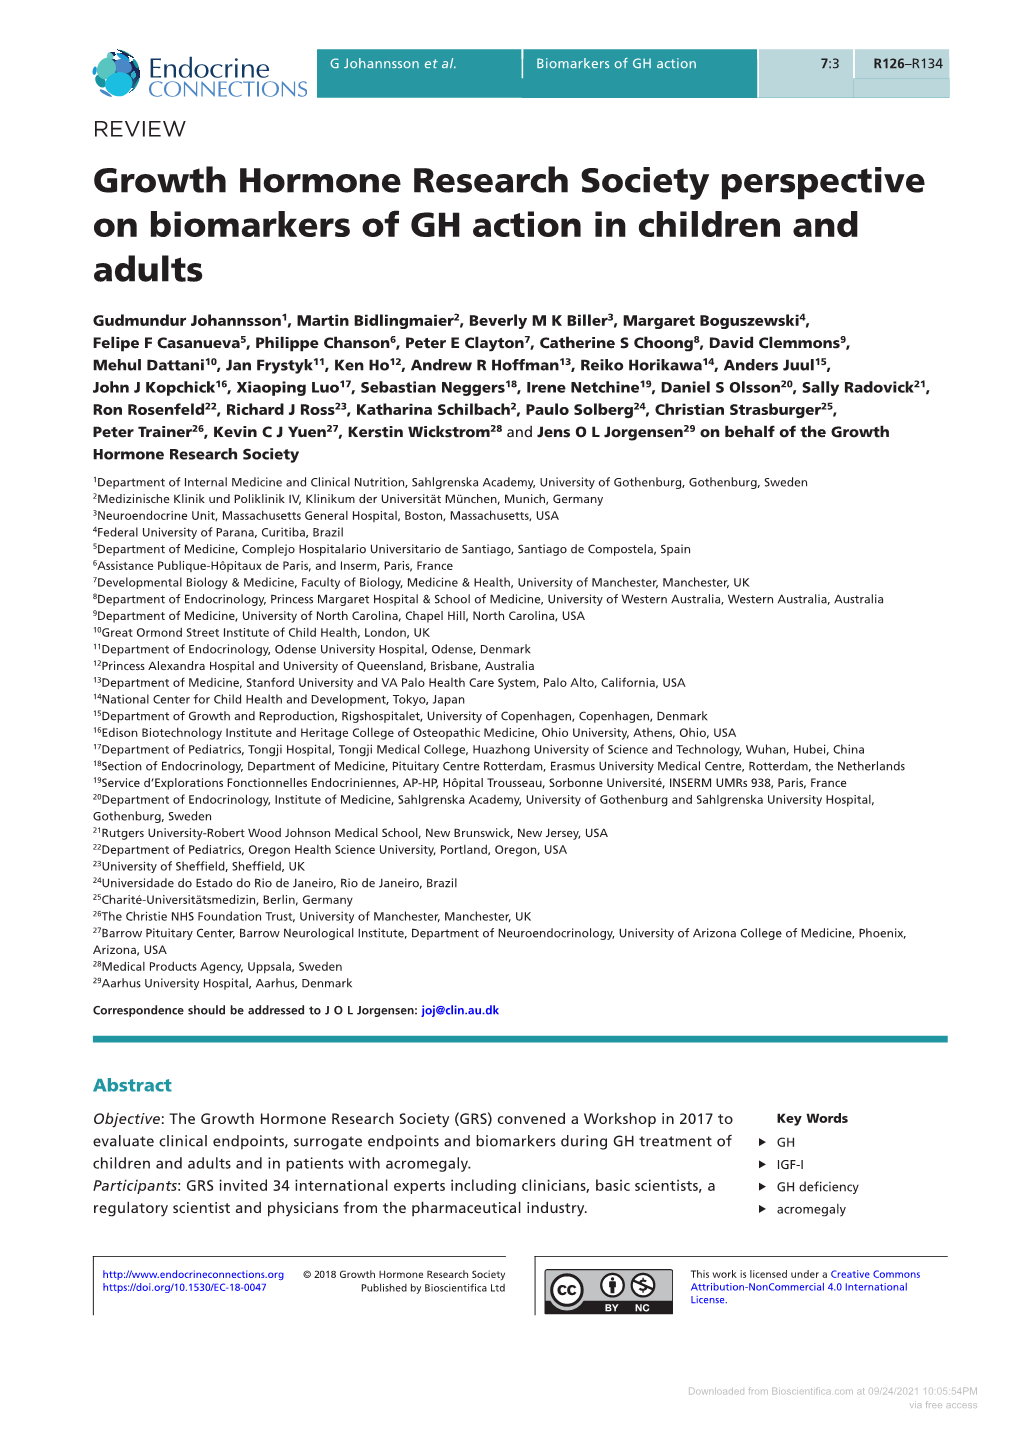 Growth Hormone Research Society Perspective on Biomarkers of GH Action in Children and Adults